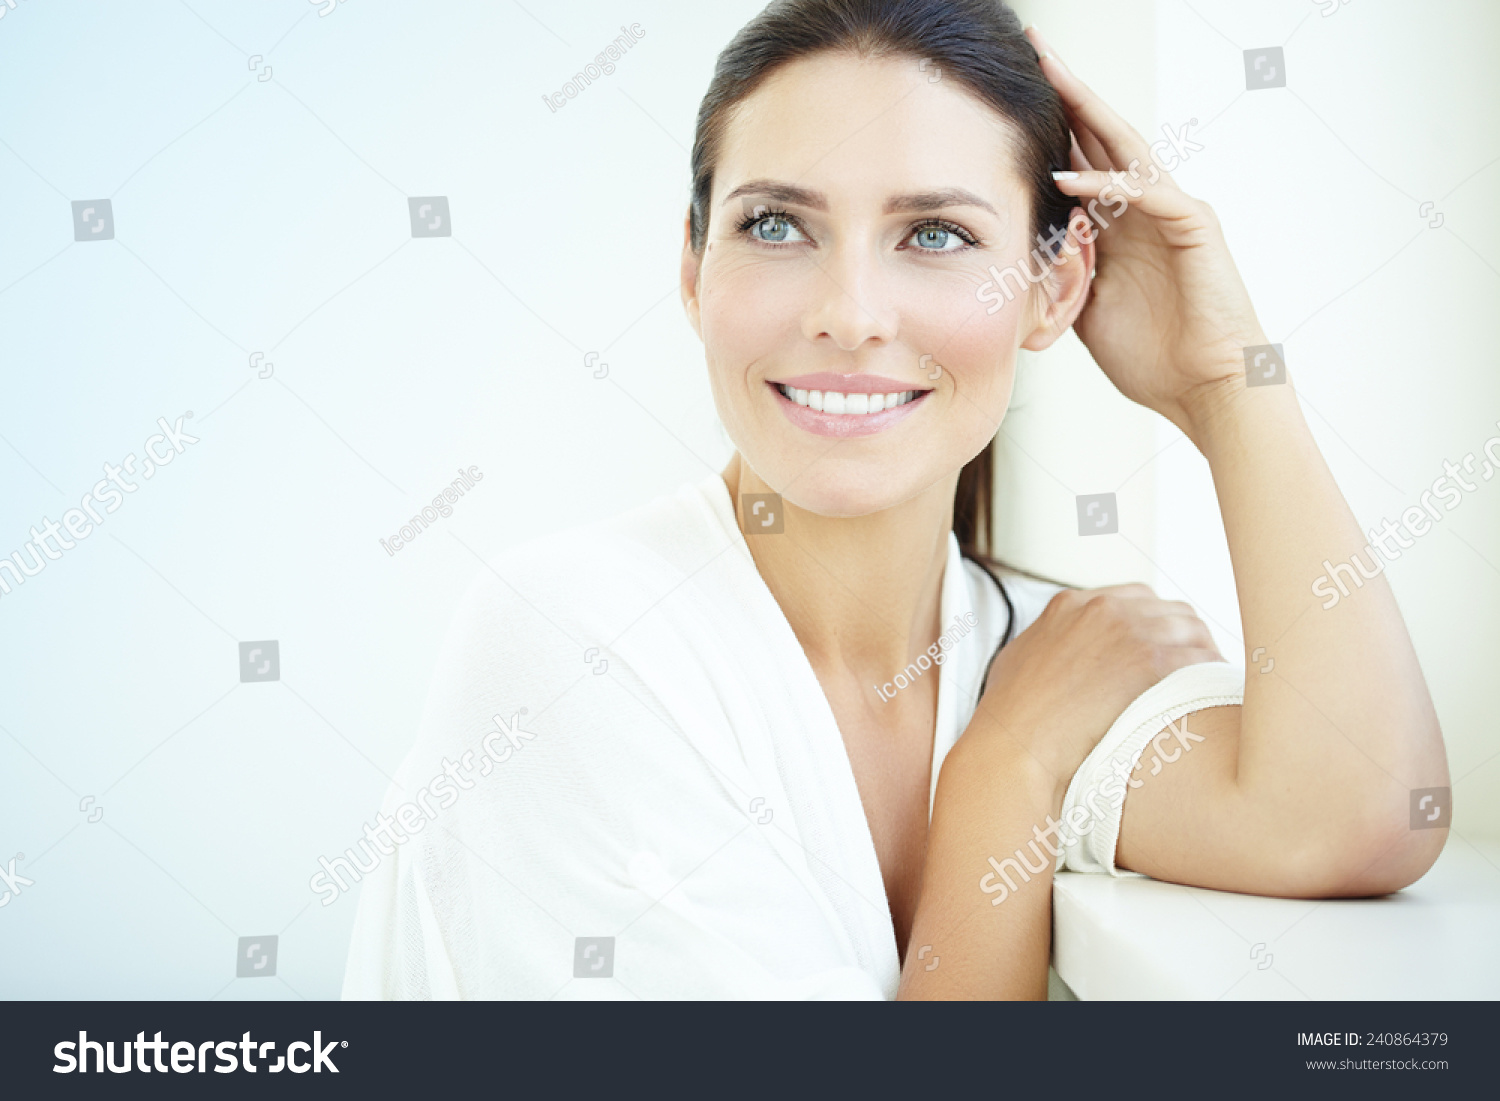 Smiling 30 year old woman at the window. Fresh light blue background. #240864379